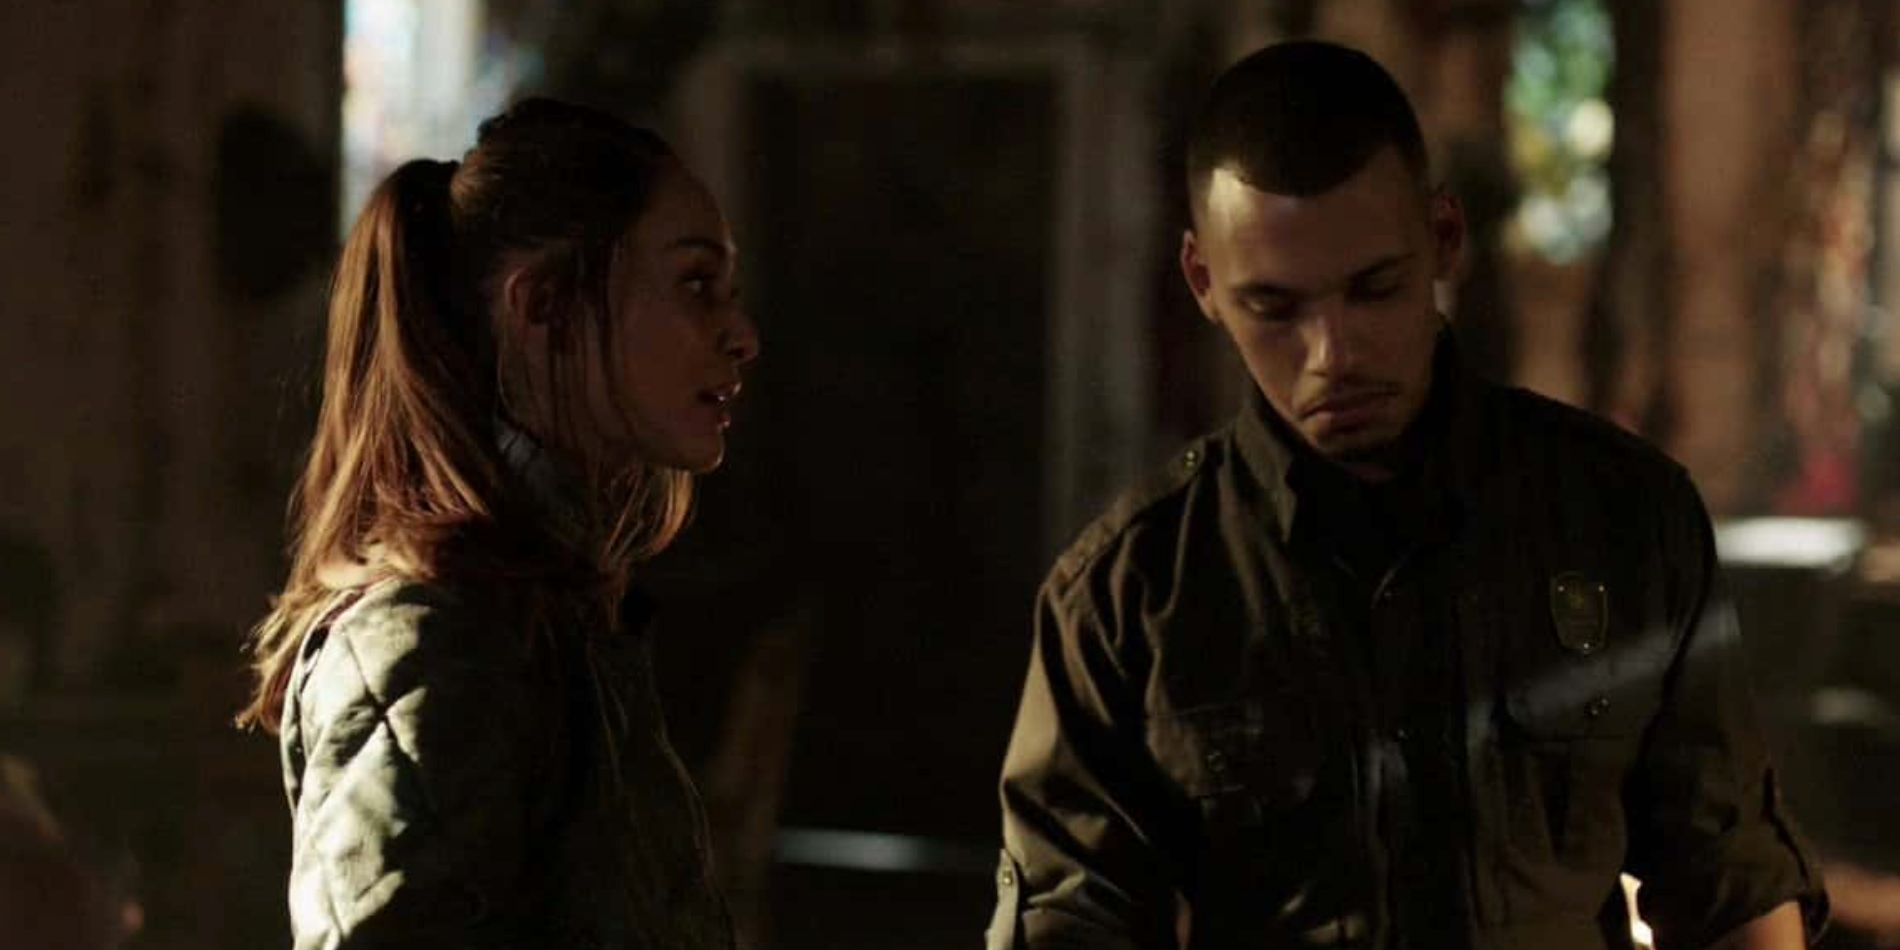 Raven speaks with Shaw in The 100 season 5